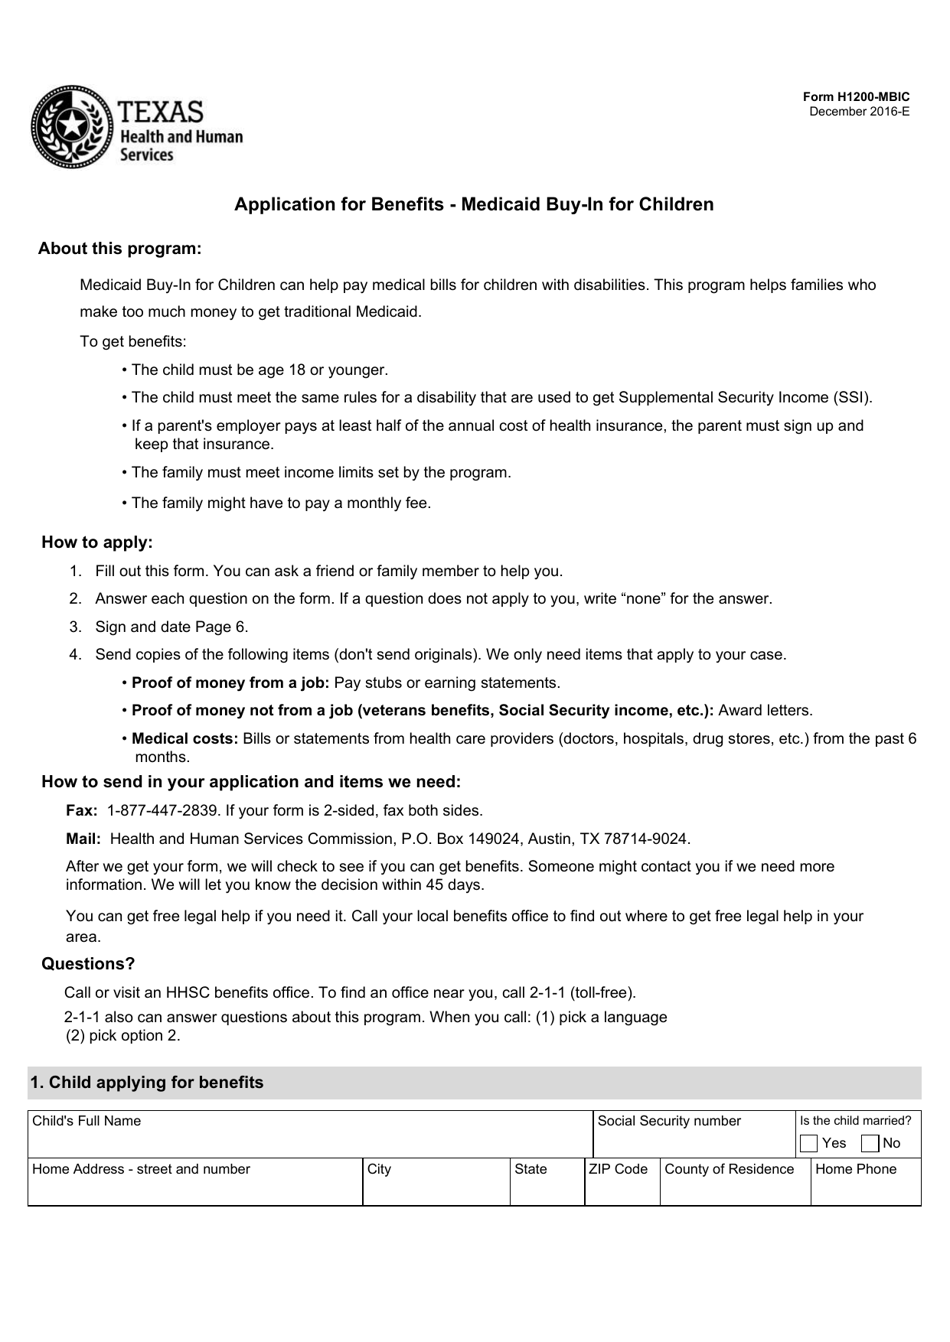 Form H1200-MBIC Application for Benefits - Medicaid Buy-In for Children - Texas, Page 1